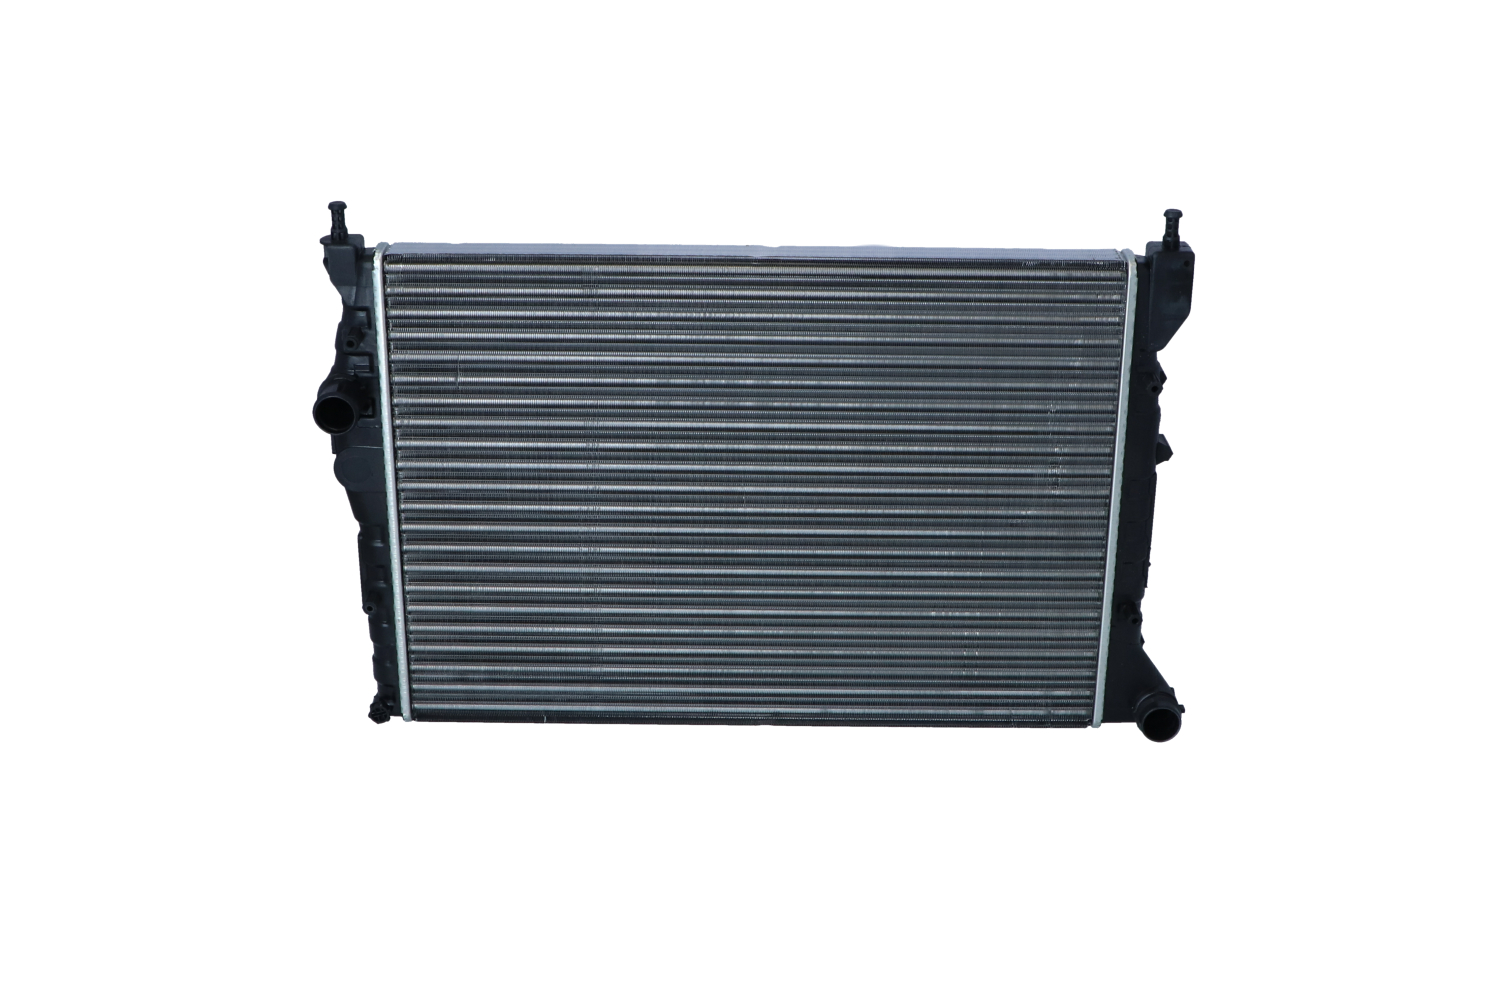 NRF EASY FIT 53238 Engine radiator Aluminium, 580 x 398 x 26 mm, Mechanically jointed cooling fins, Brazed cooling fins